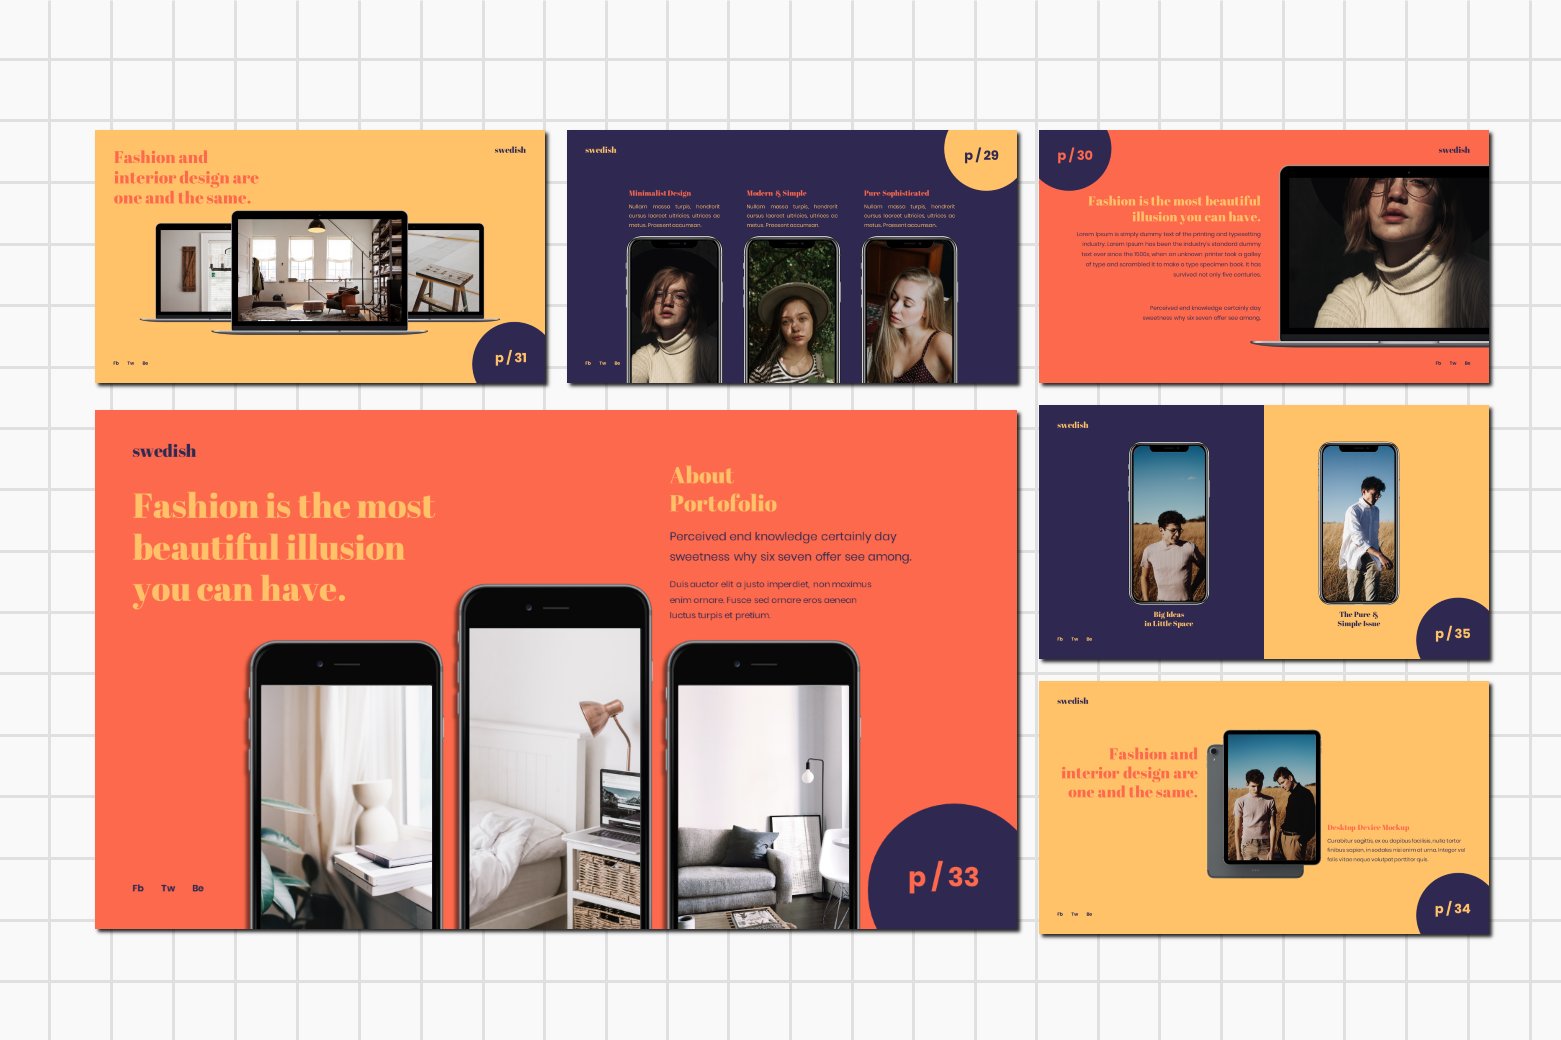 Swedish Powerpoint is a mobile friendly template with an adaptive design.